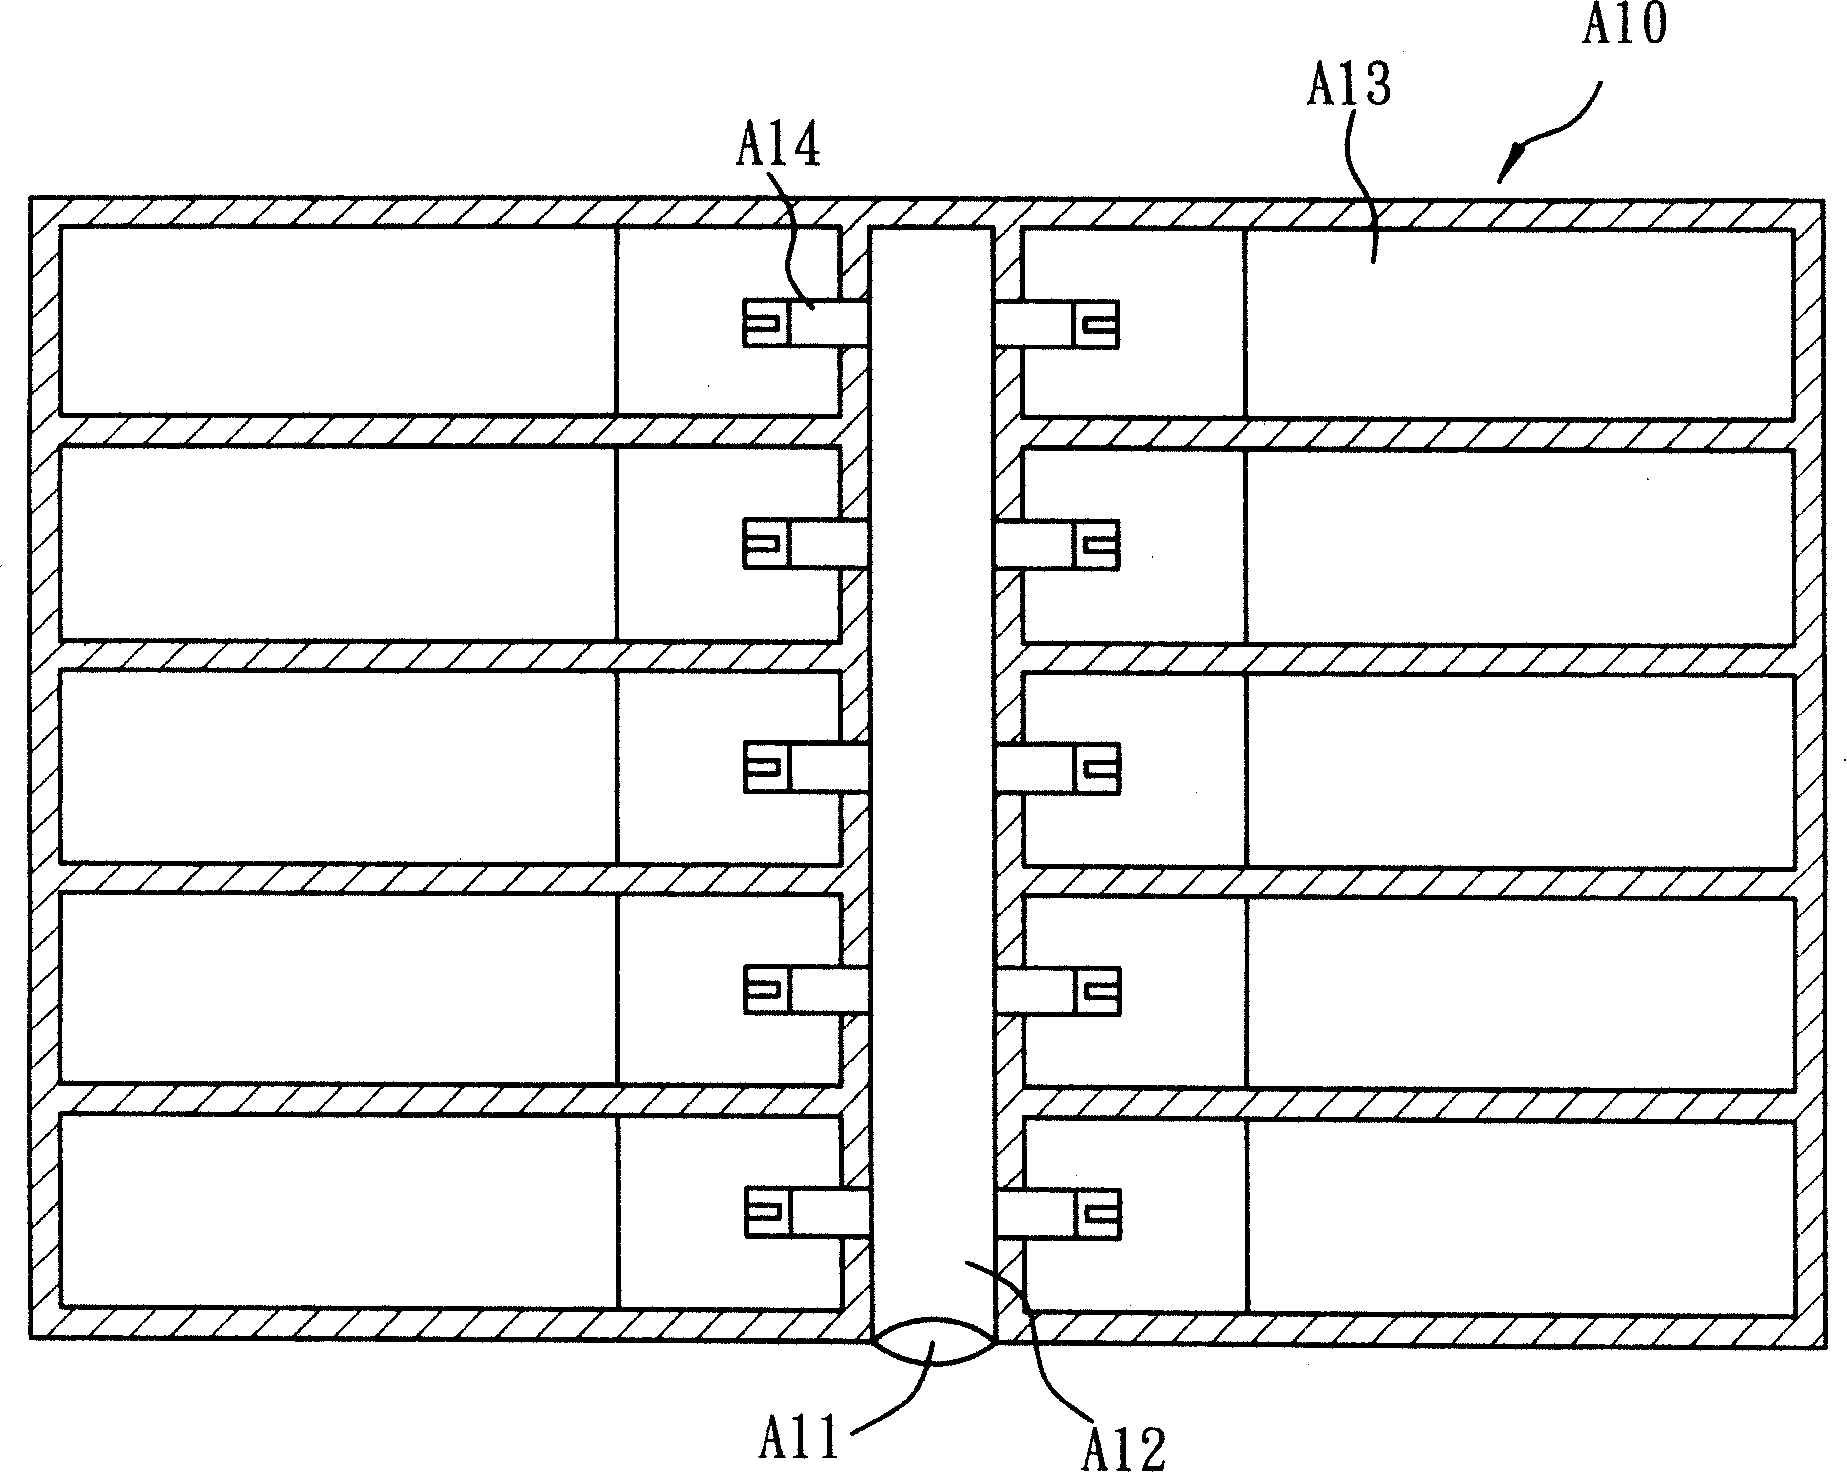 Air valve and air sealing body with the same